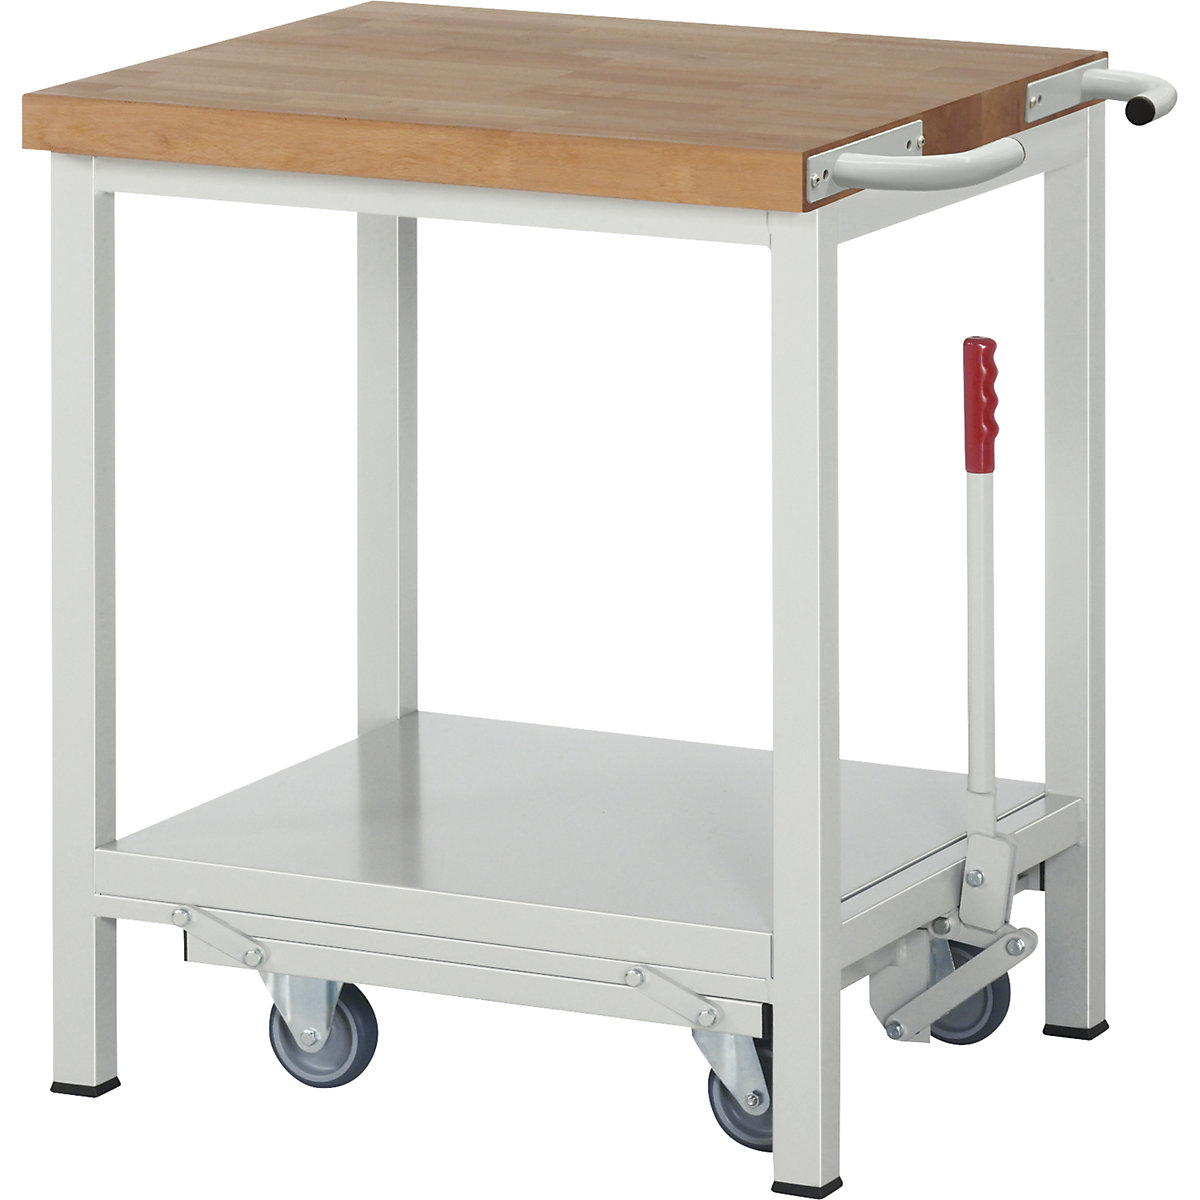 Mobile and lowerable workbench, Series 8000 frame construction - eurokraft pro